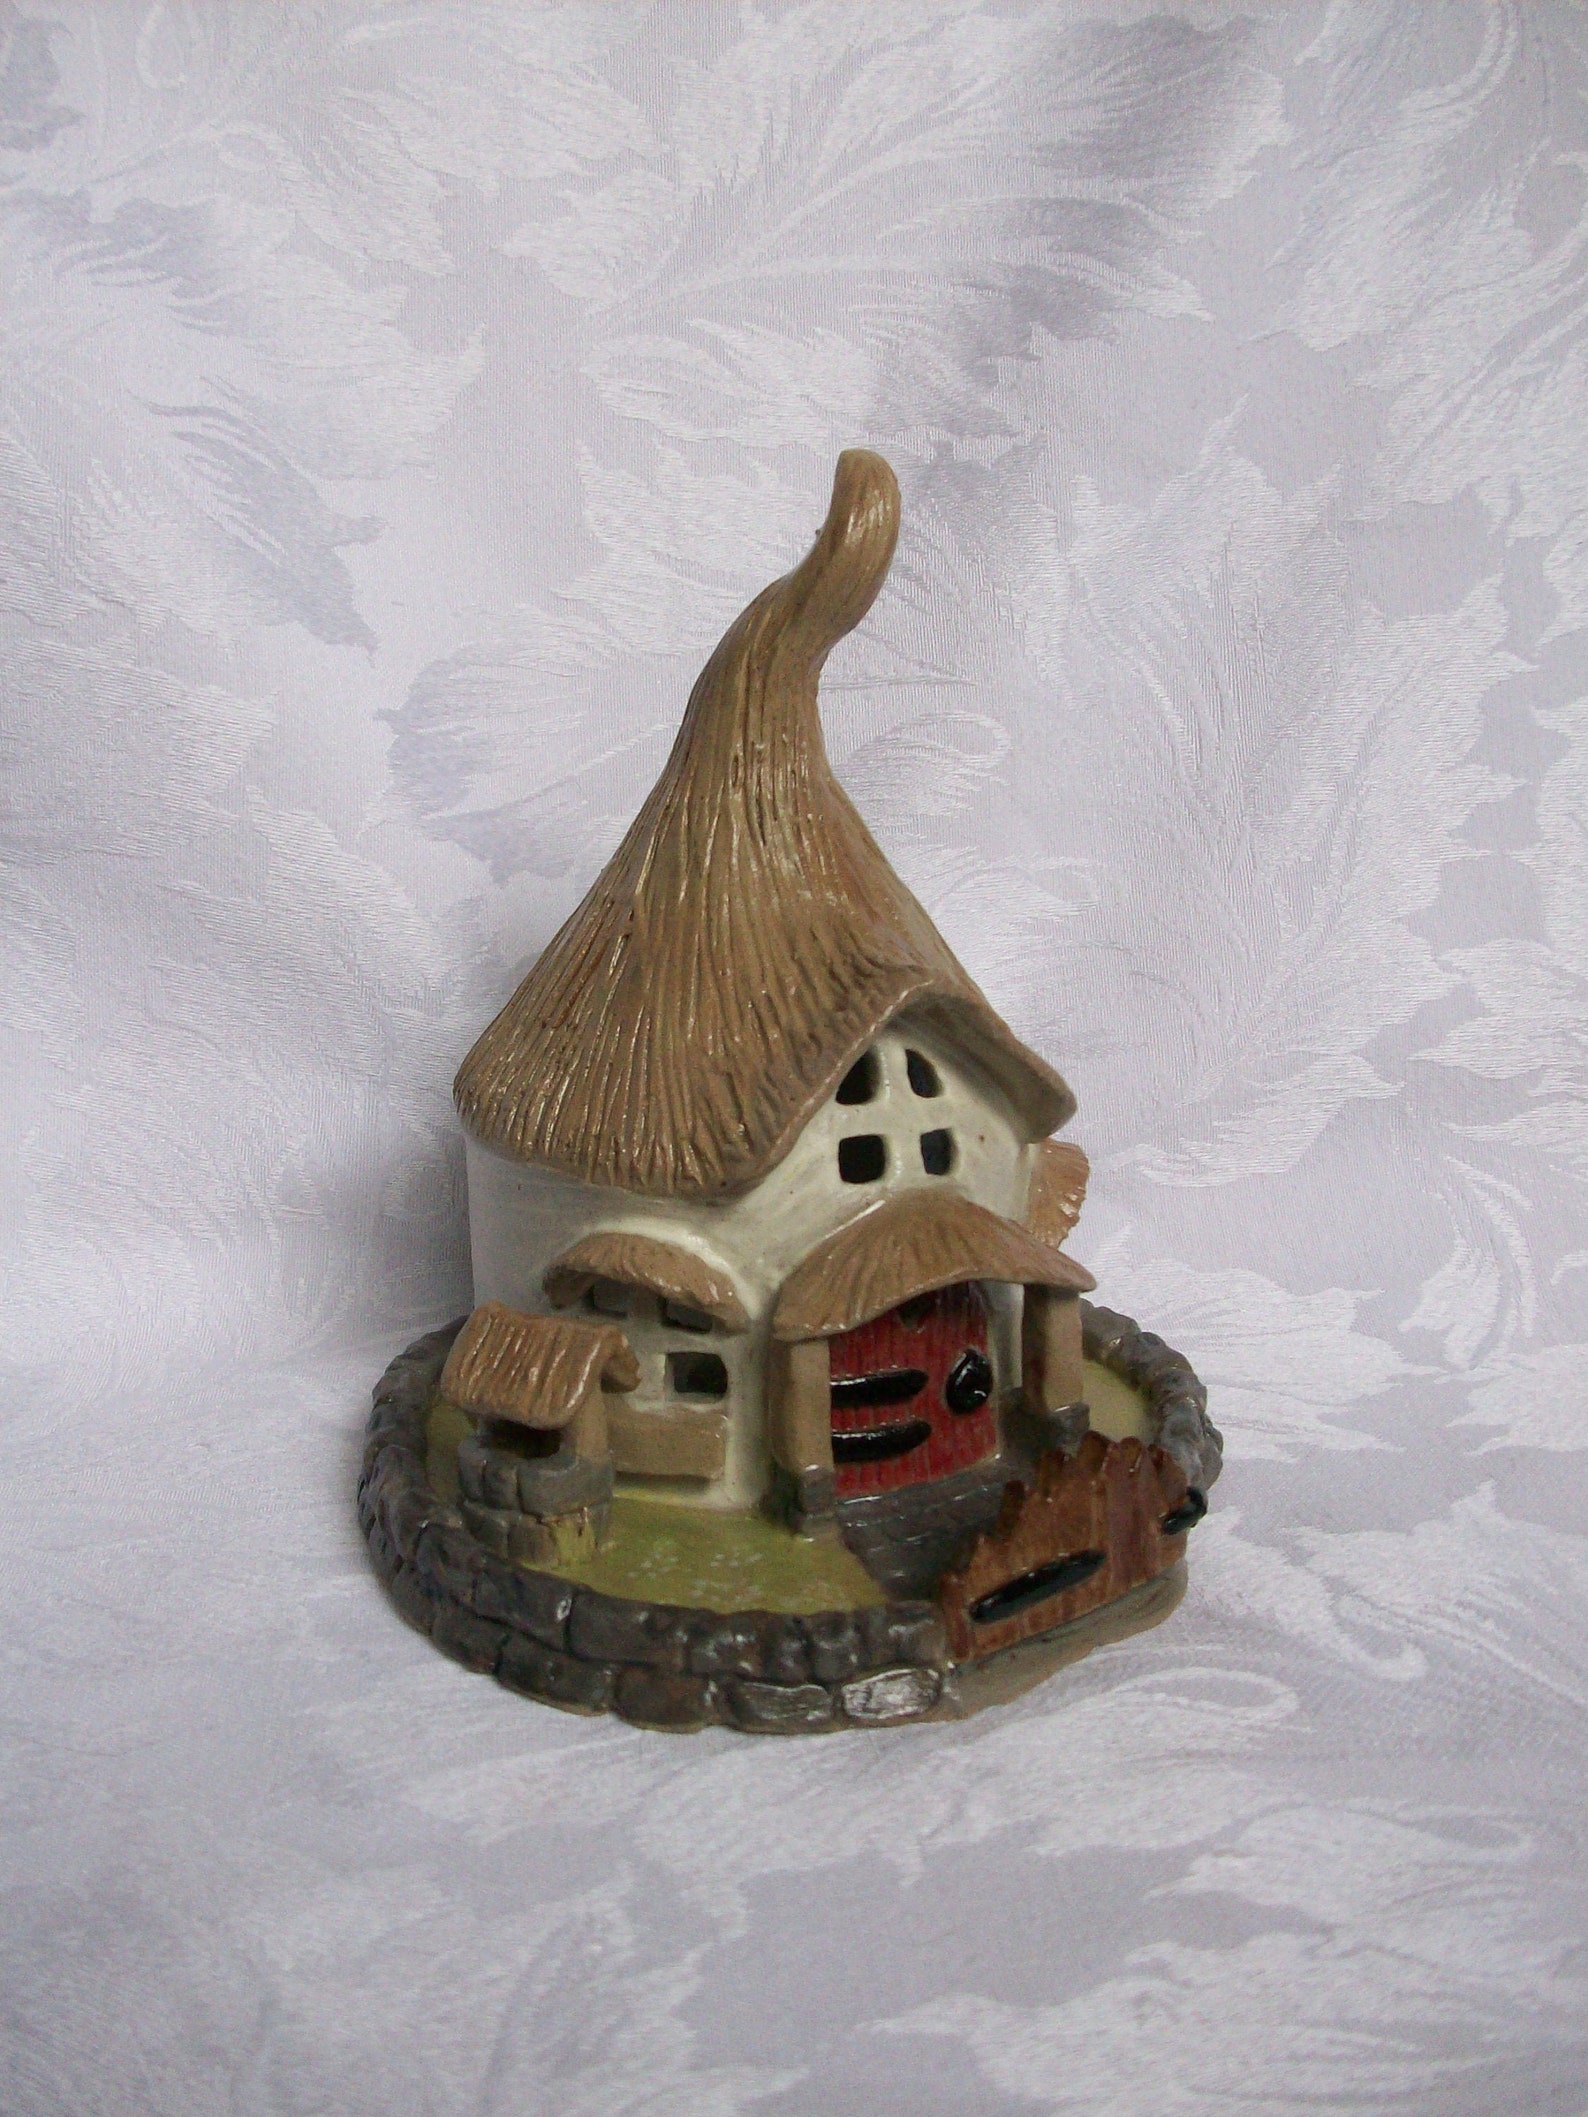 Handmade Ceramic Fairy House With Garden and Thatched Roof - Etsy